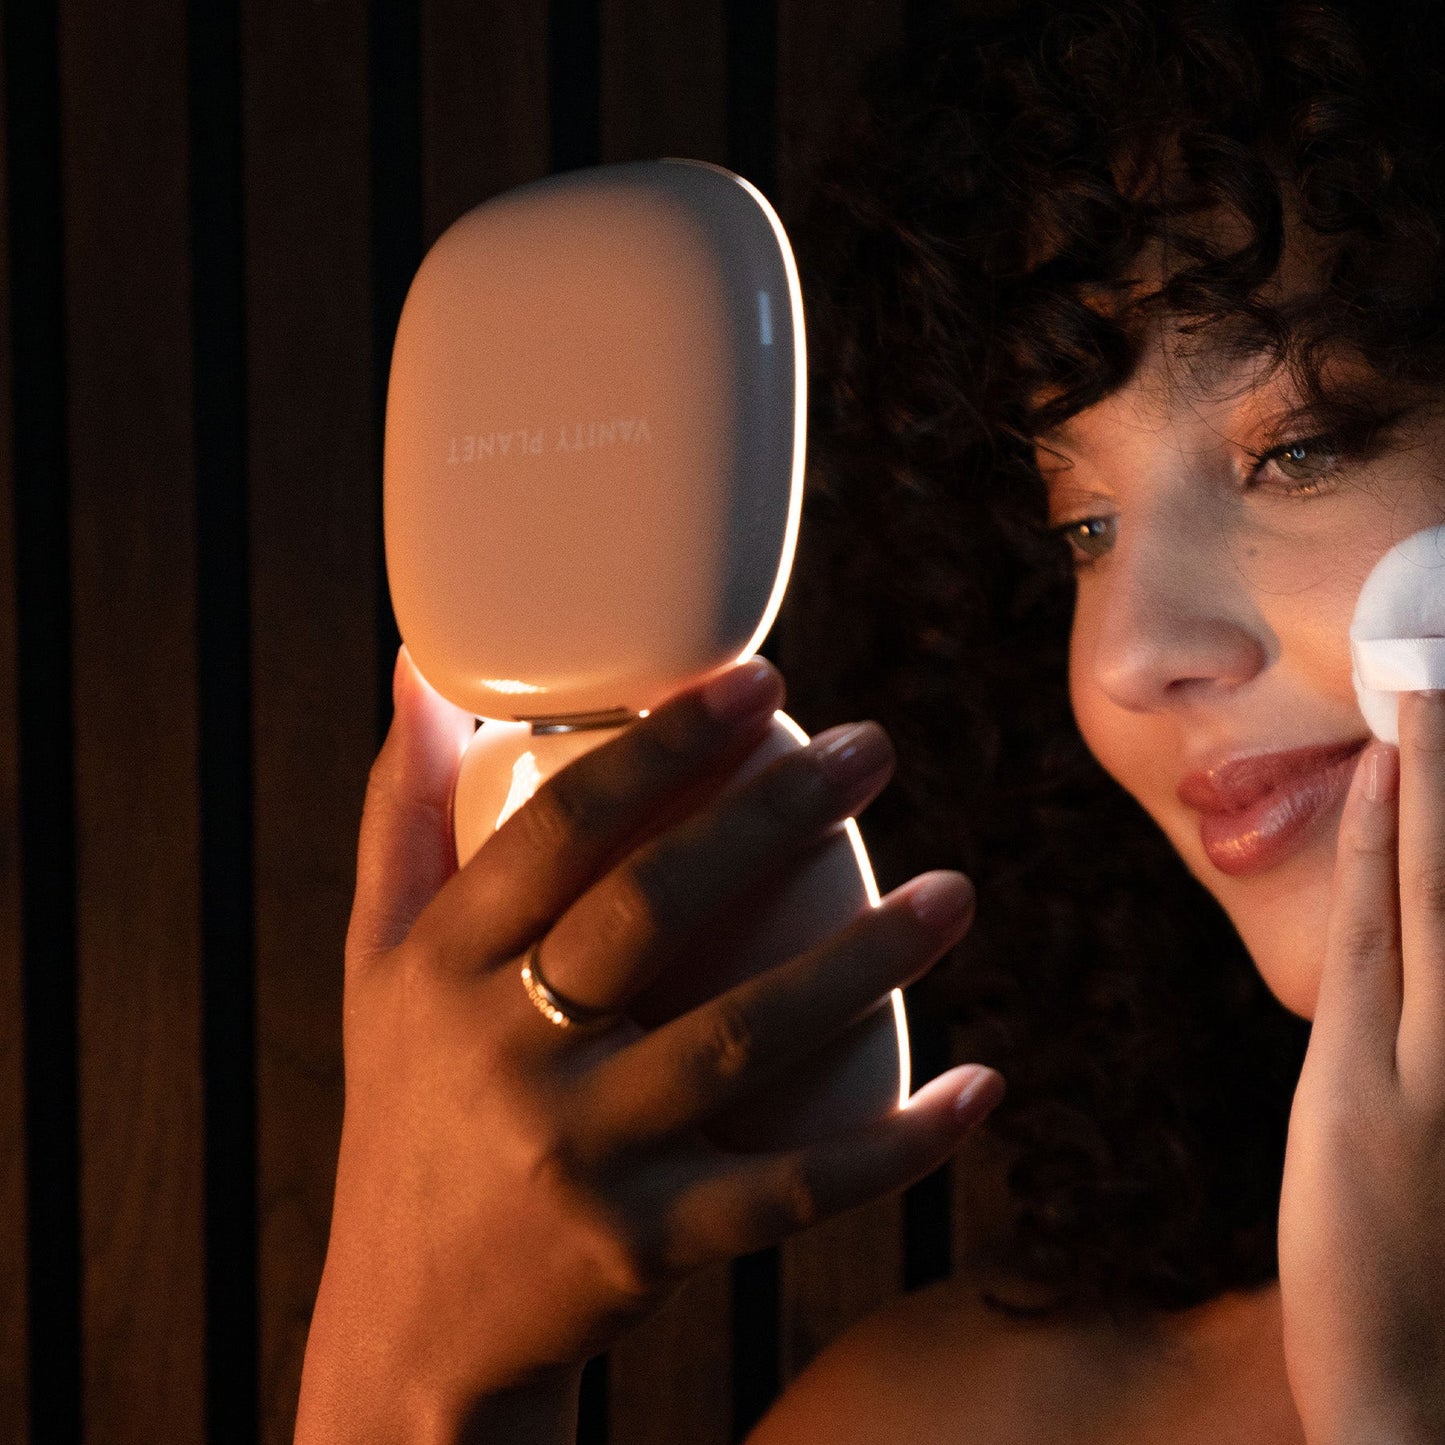 Moda | LED Compact Mirror by Vanity Planet